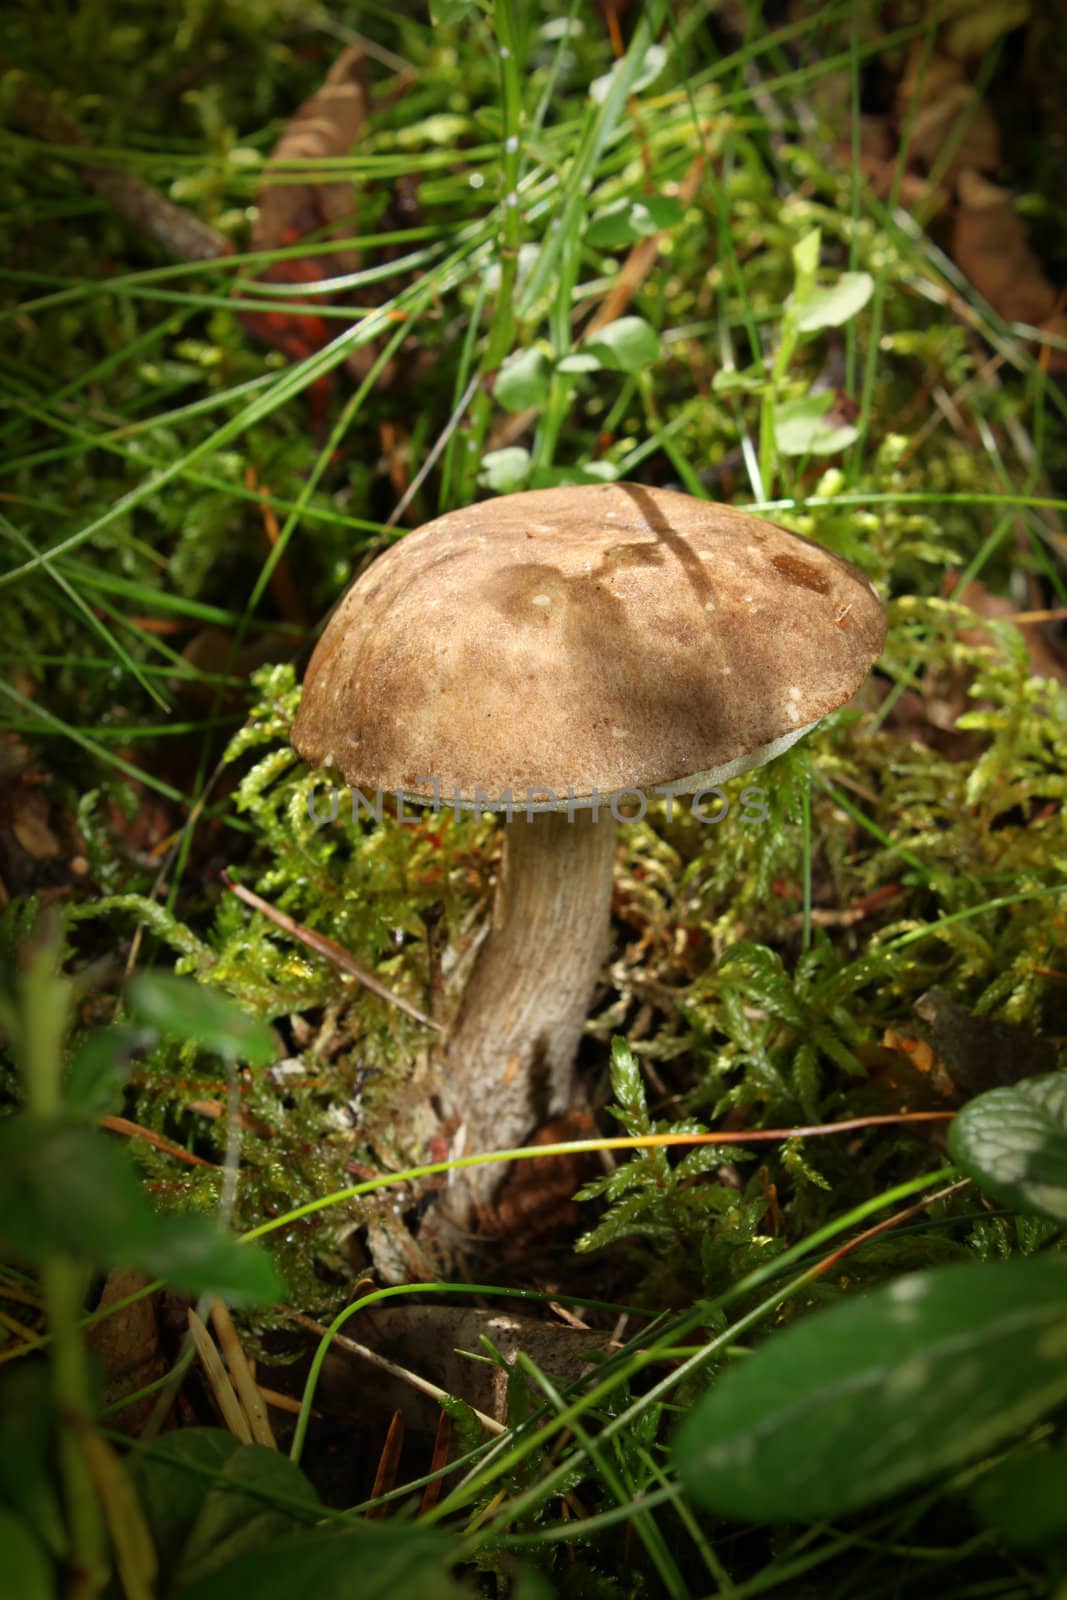 Mushroom growing on green autumn forest moss background